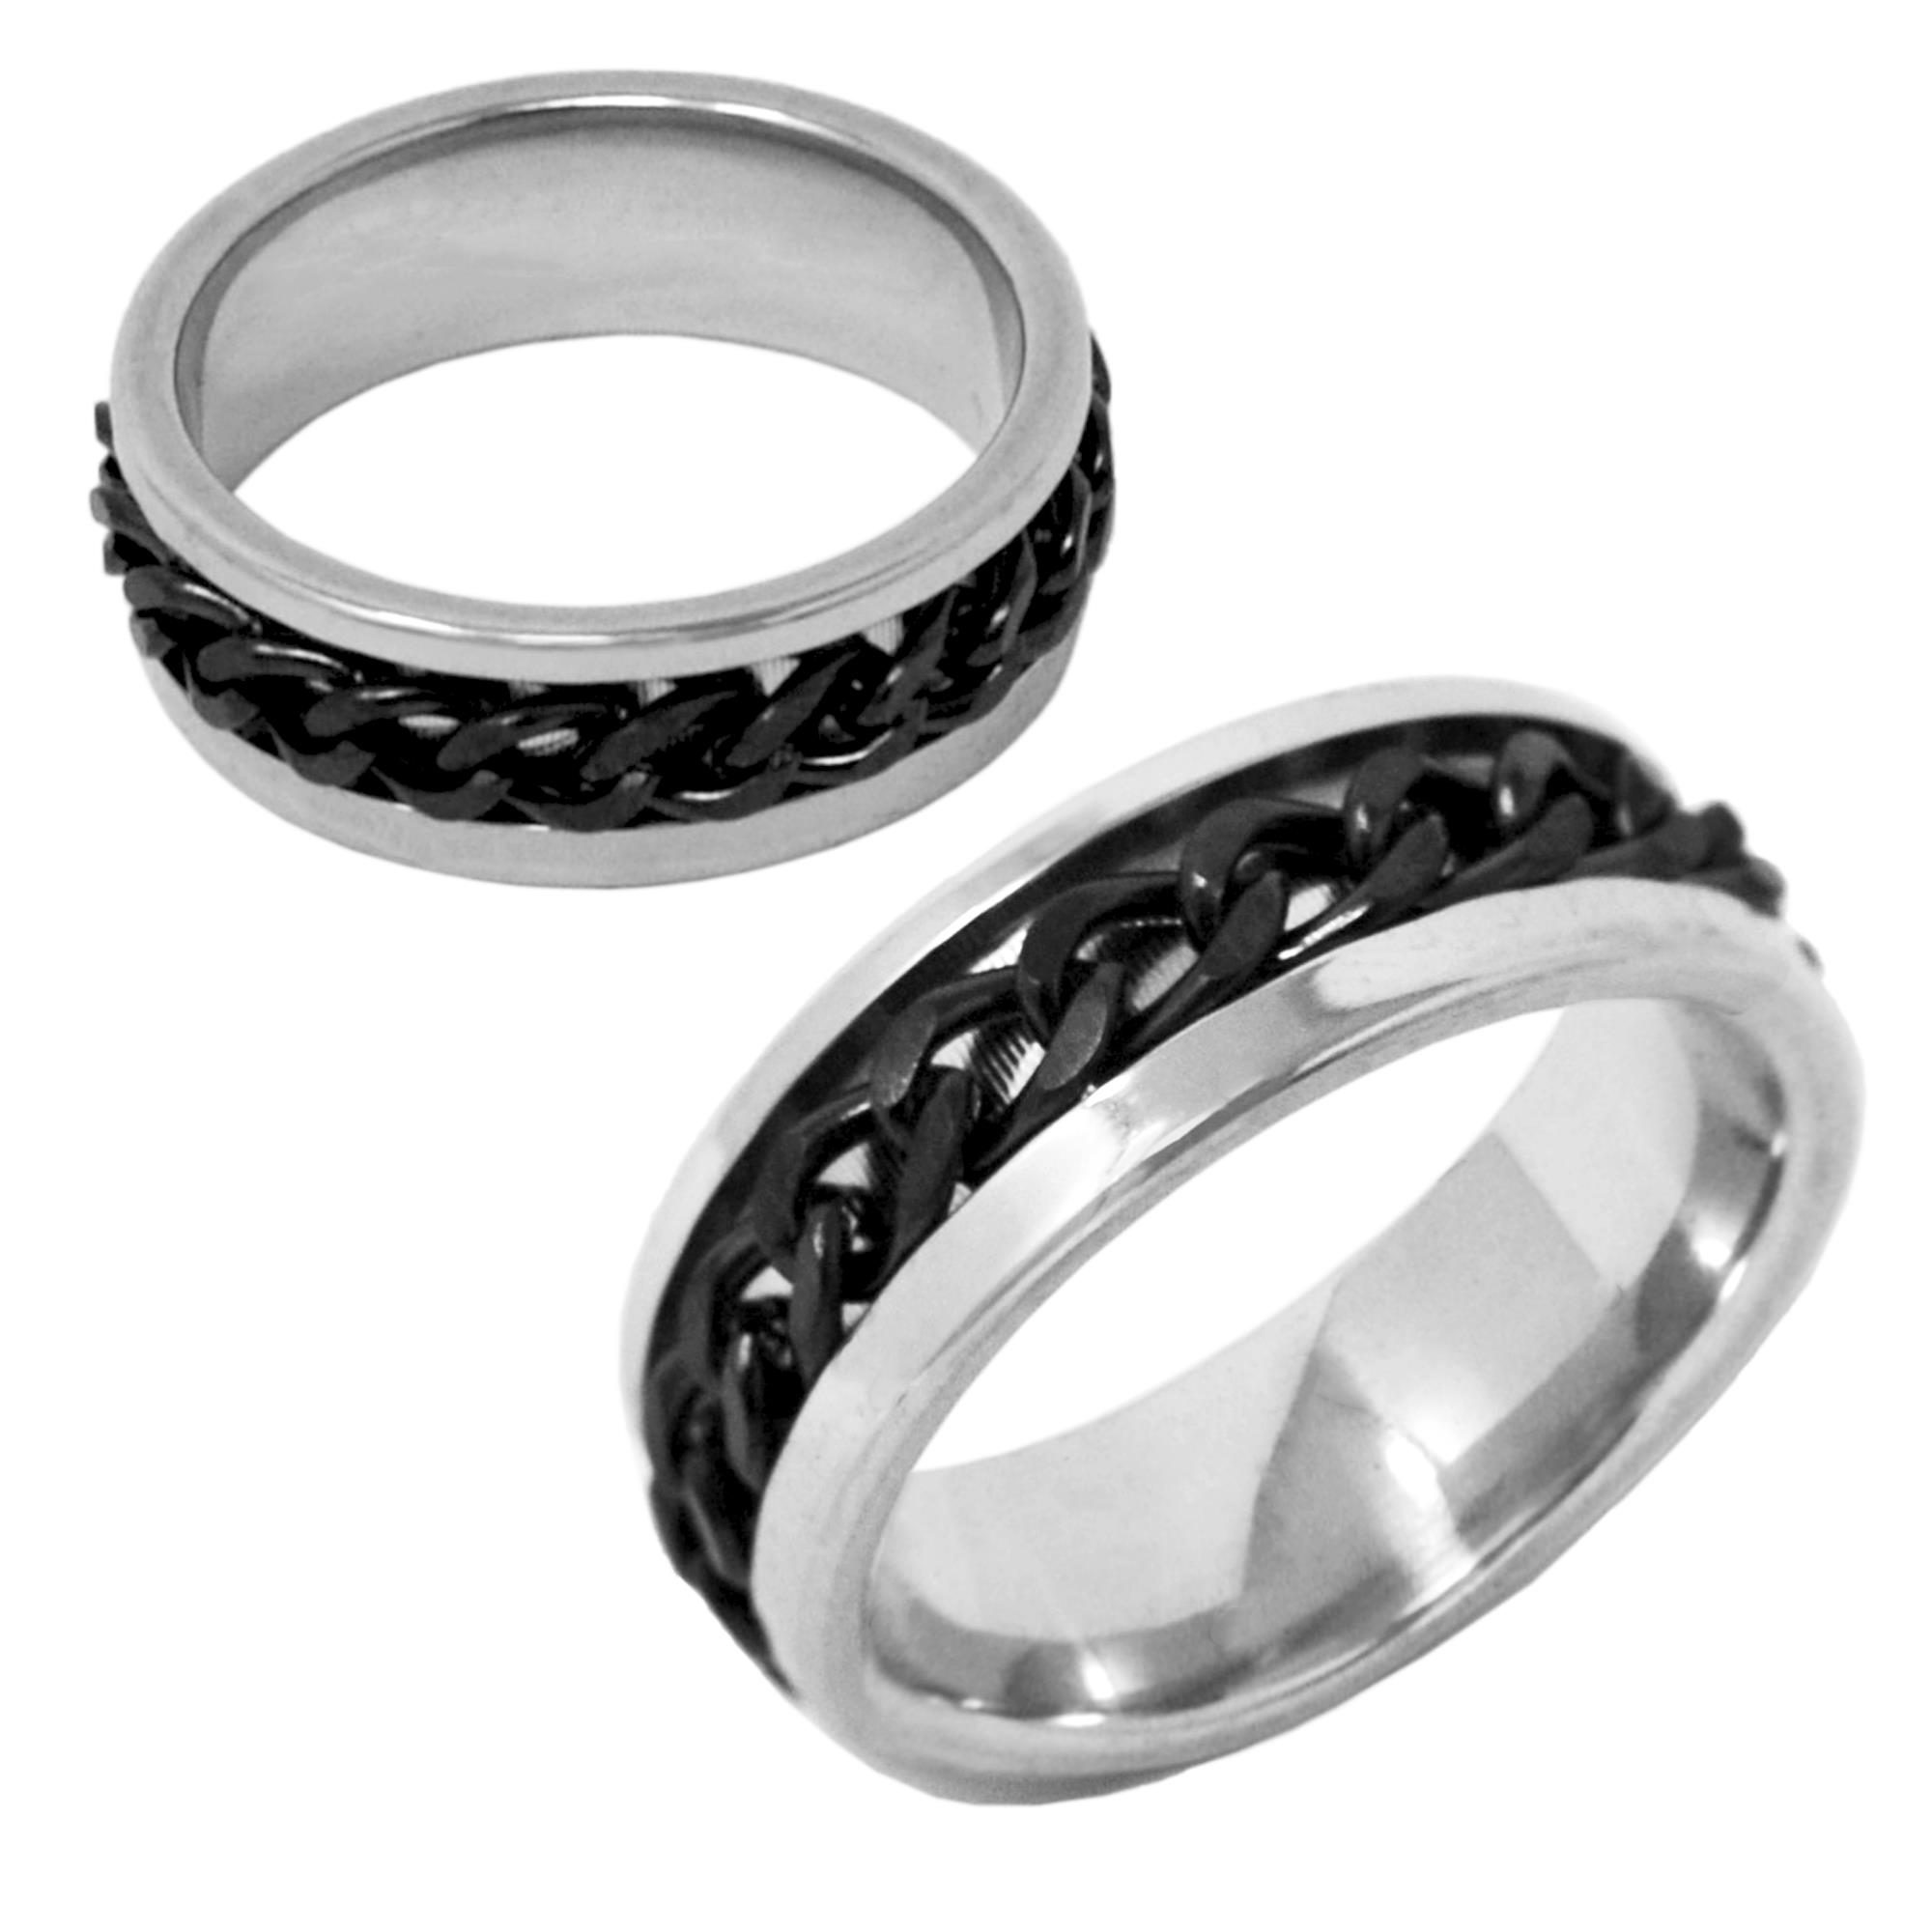 STAINLESS STEEL CHAIN LINK RING